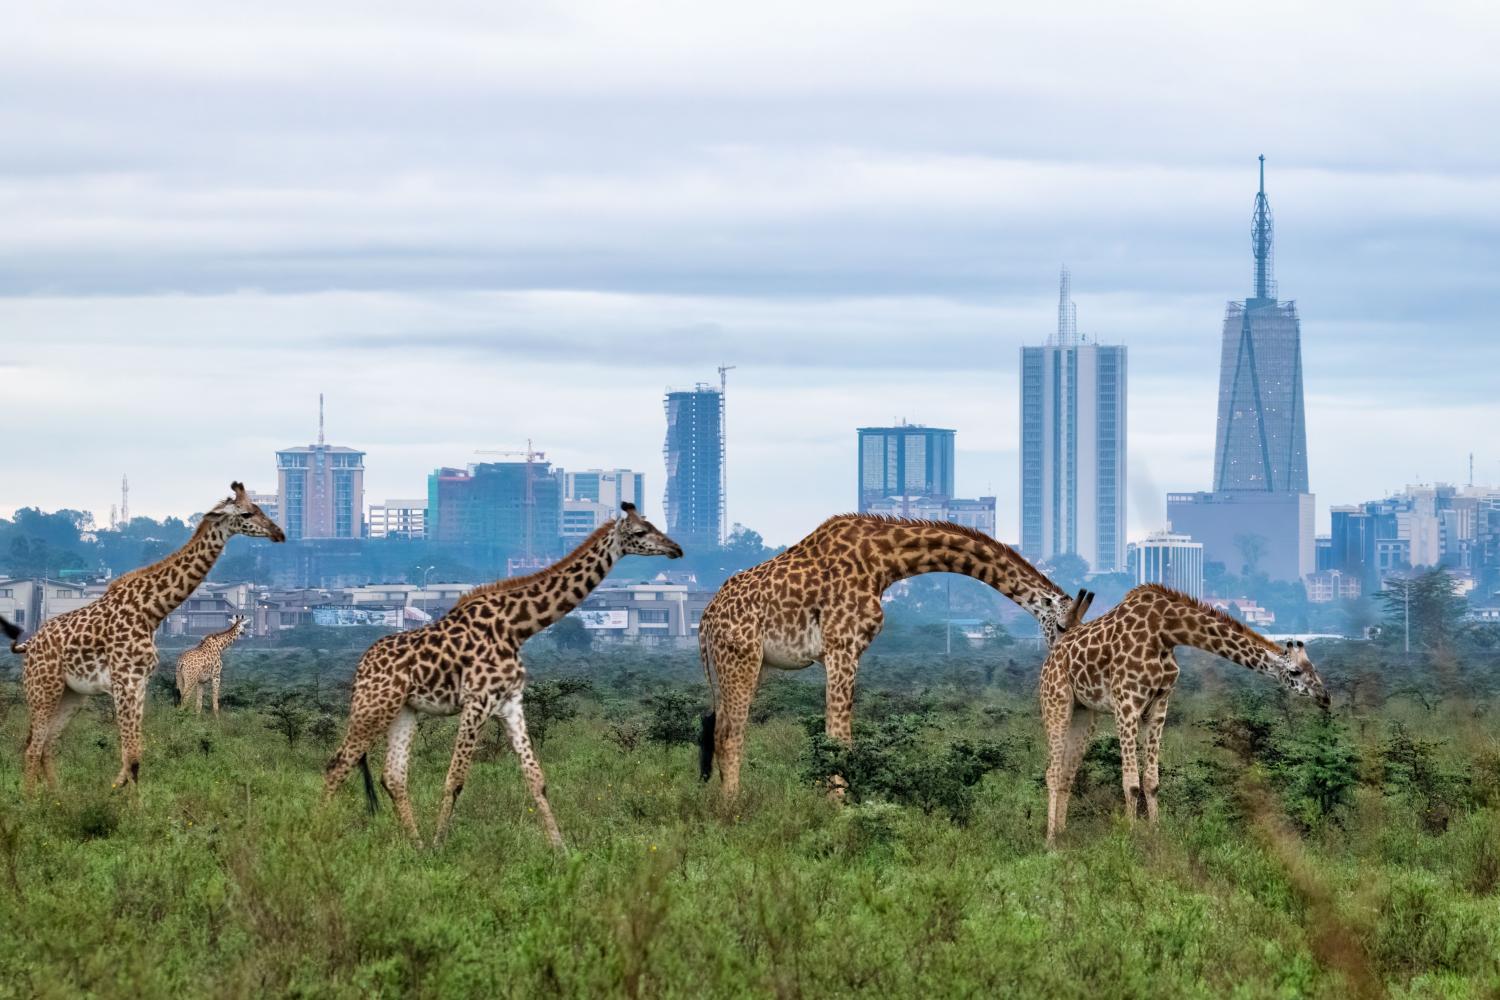 Suhaib Alvi took this amazing picture of giraffe at Nairobi National Park in Kenya. The 24-year-old says of his photograph, which was taken about 7 km south of the capital city: “My aim of the photo was to make the giraffes look as tall as the buildings in Nairobi which is why I have captioned this photo ‘The Towers of Nairobi’. Suhaib has just completed his undergraduate degree at Coventry University in the UK, studying Mechanical Engineering. He says: “I am also the youngest person hosting photographic safaris in Kenya.” Where: Nairobi, Kenya When: 06 May 2017 Credit: Suhaib Alvi (Cover Images) **Editorial Use Only**